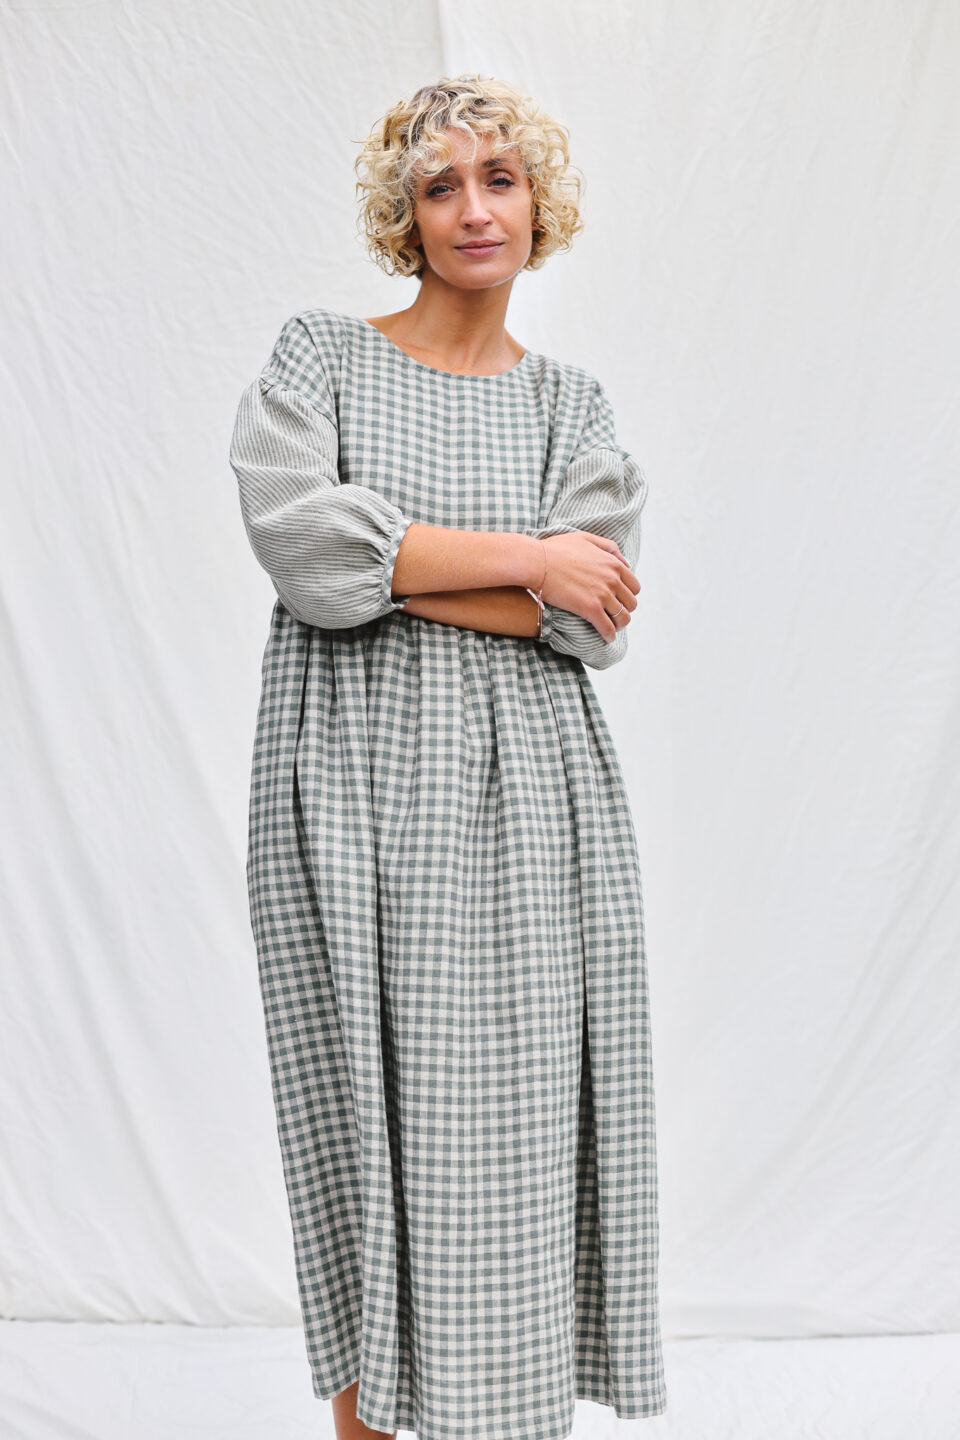 Gingham linen dress with contrasting striped puffy sleeves PERLA | Dress | Sustainable clothing | OffOn clothing